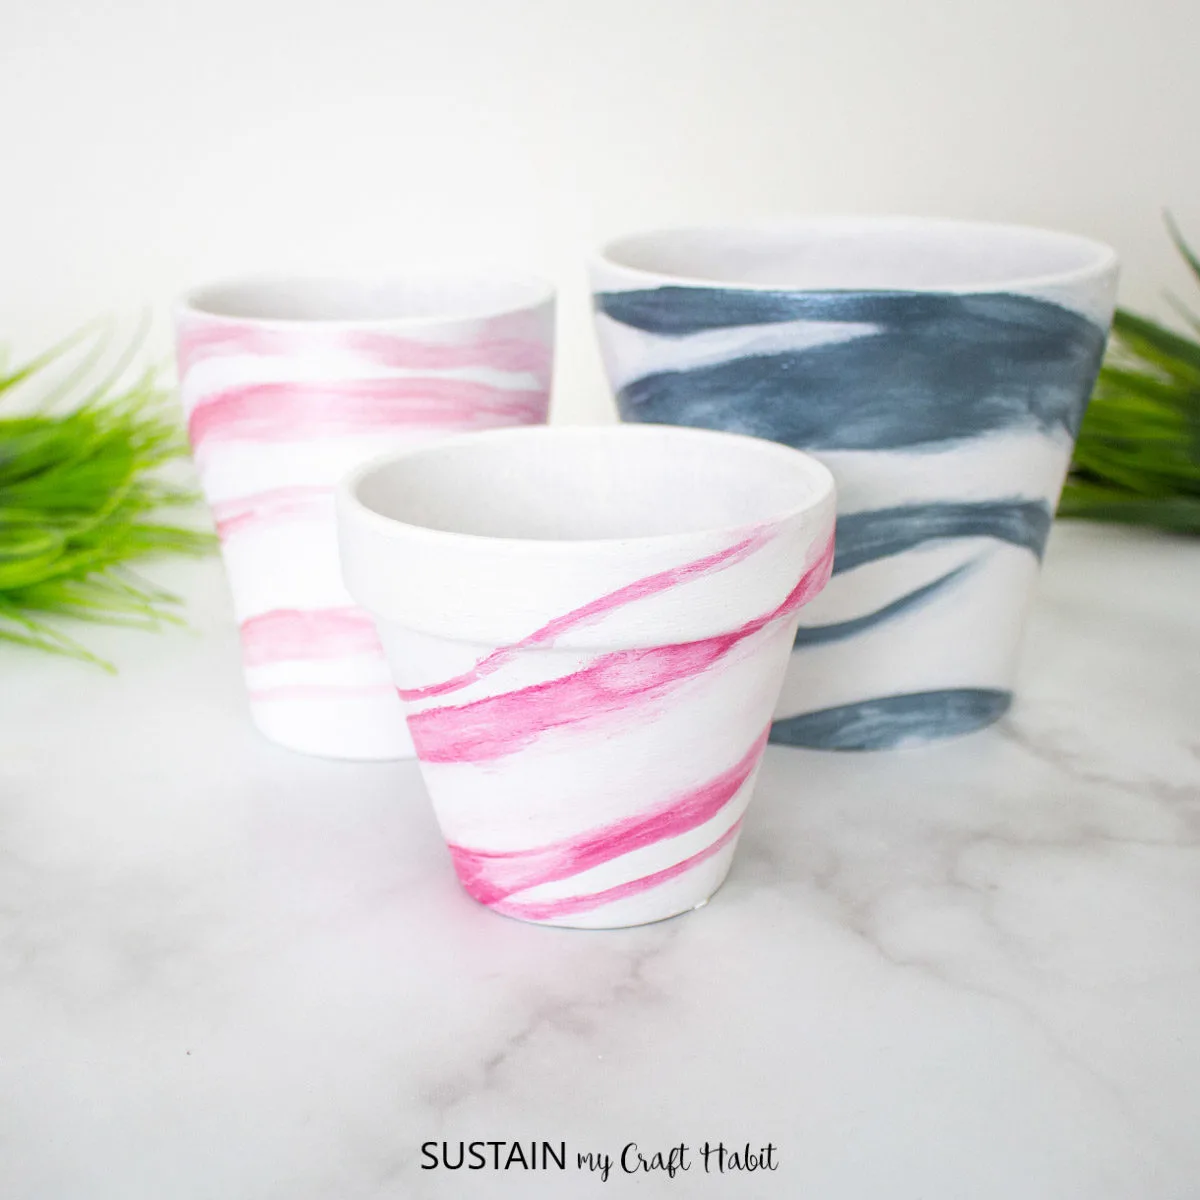 Terracotta pots painted with pink and blue marble effects.